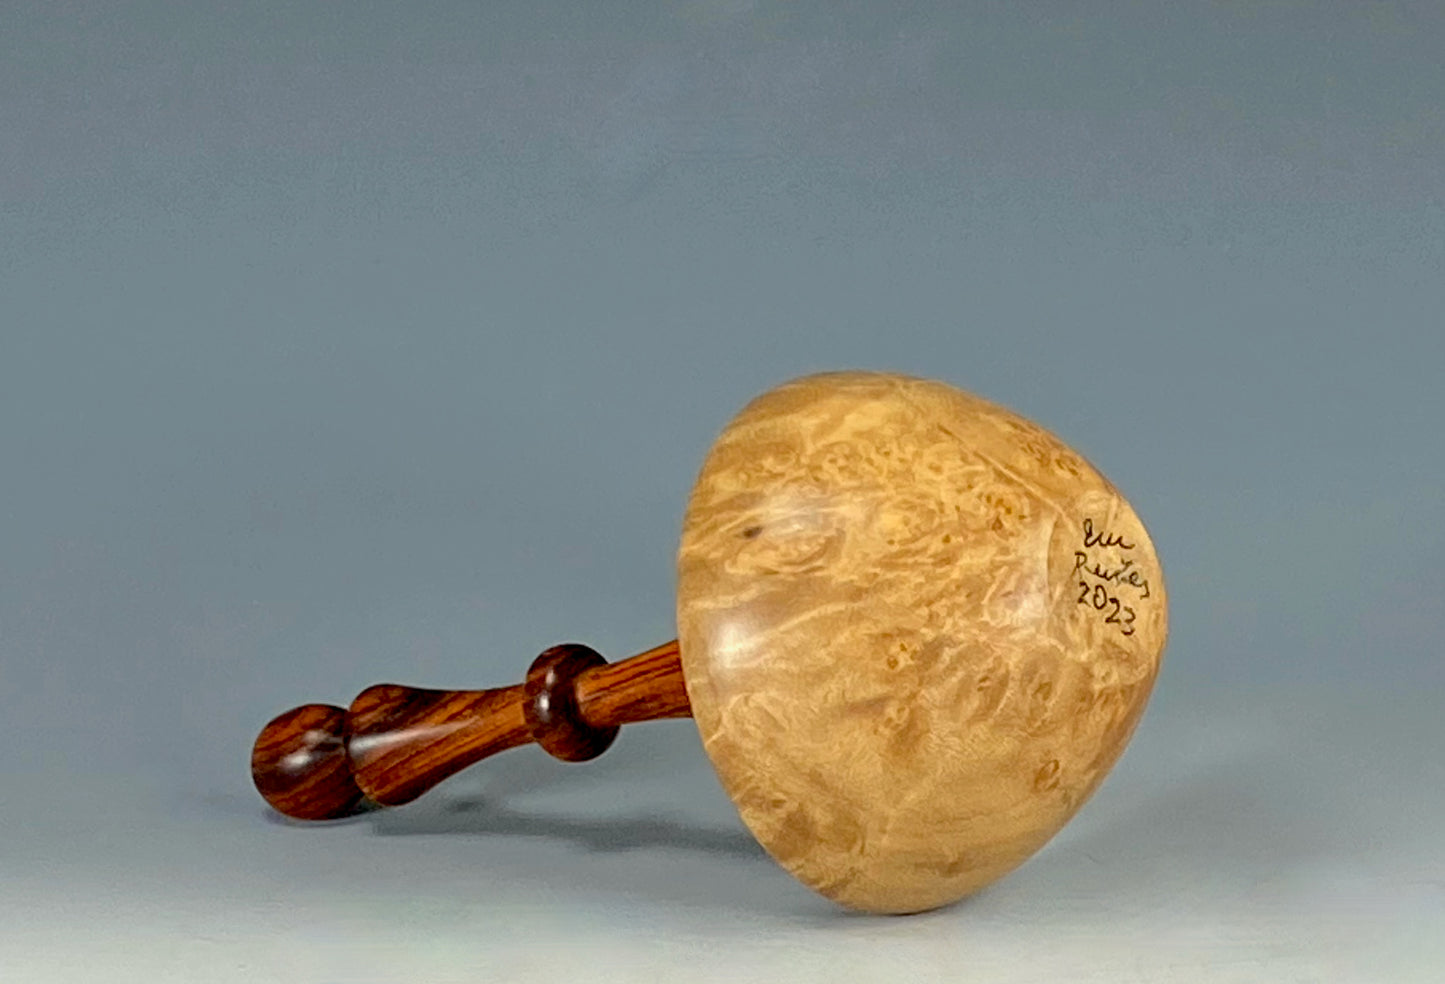 HOLLOW FORM TURNED FROM MAPLE BURL, WITH COCOBOLO ROSEWOOD FINIAL